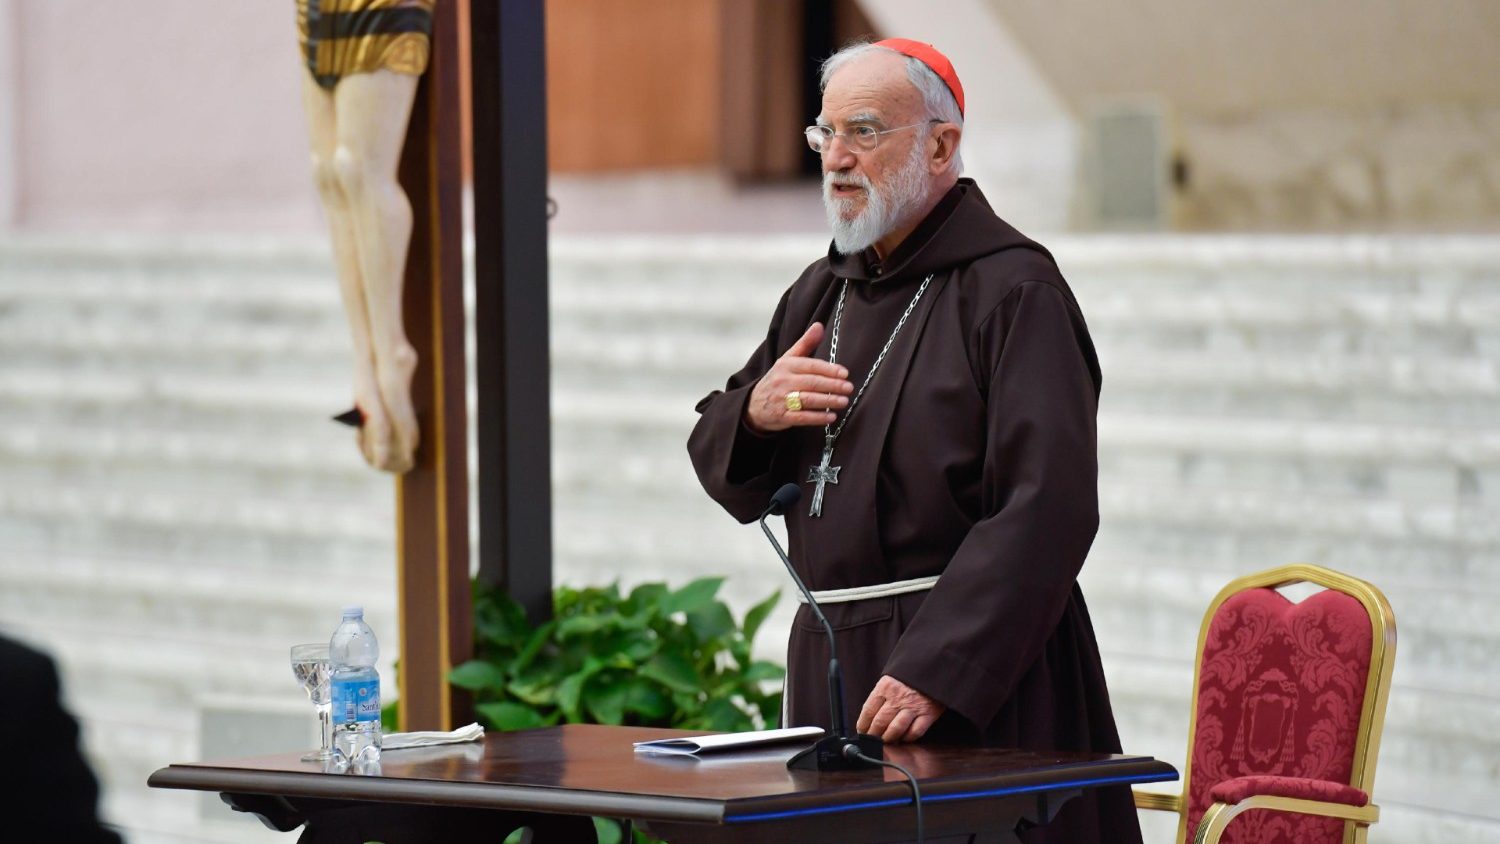 Cardinal Cantalamessa delivers the first sermon for Lent 2021